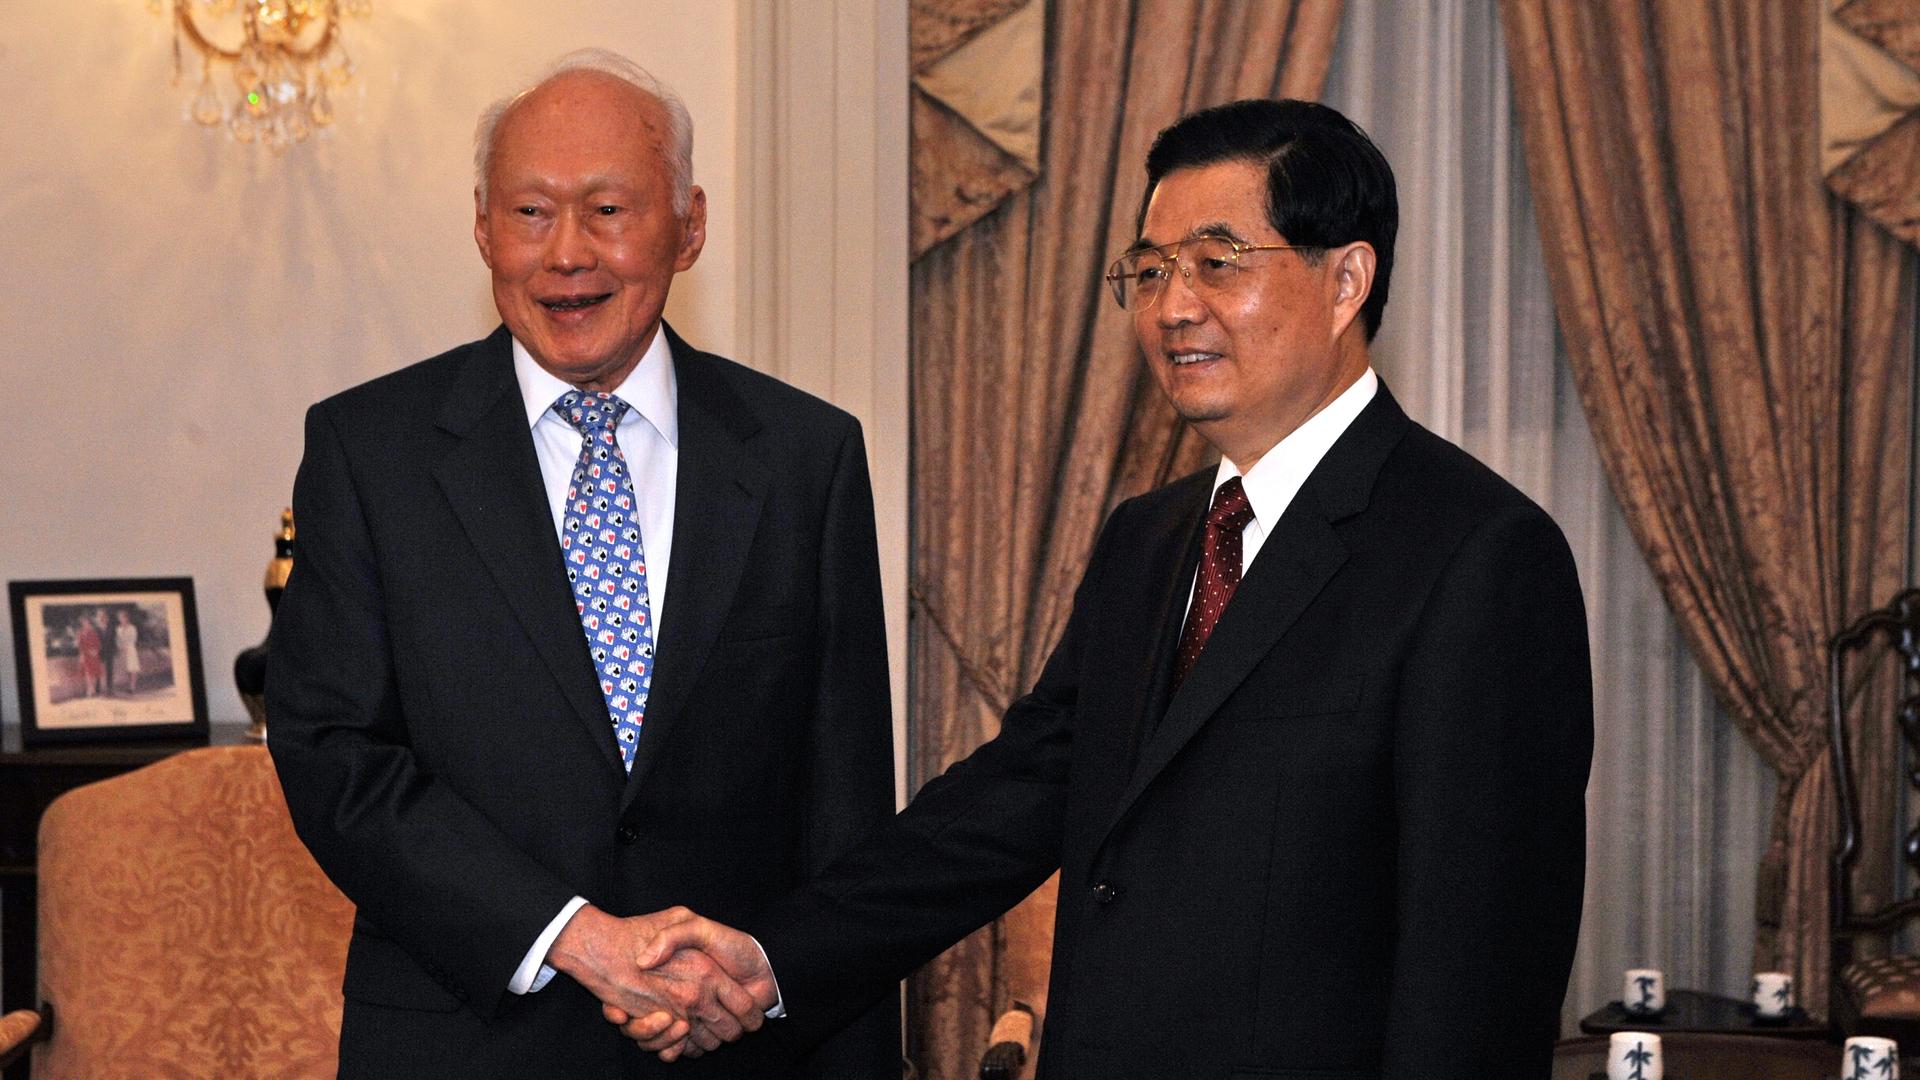 Lee Kuan Yew (L) shakes hands with China's President Hu Jintao (R) at the Istana presidential palace in Singapore on November 11, 2009.